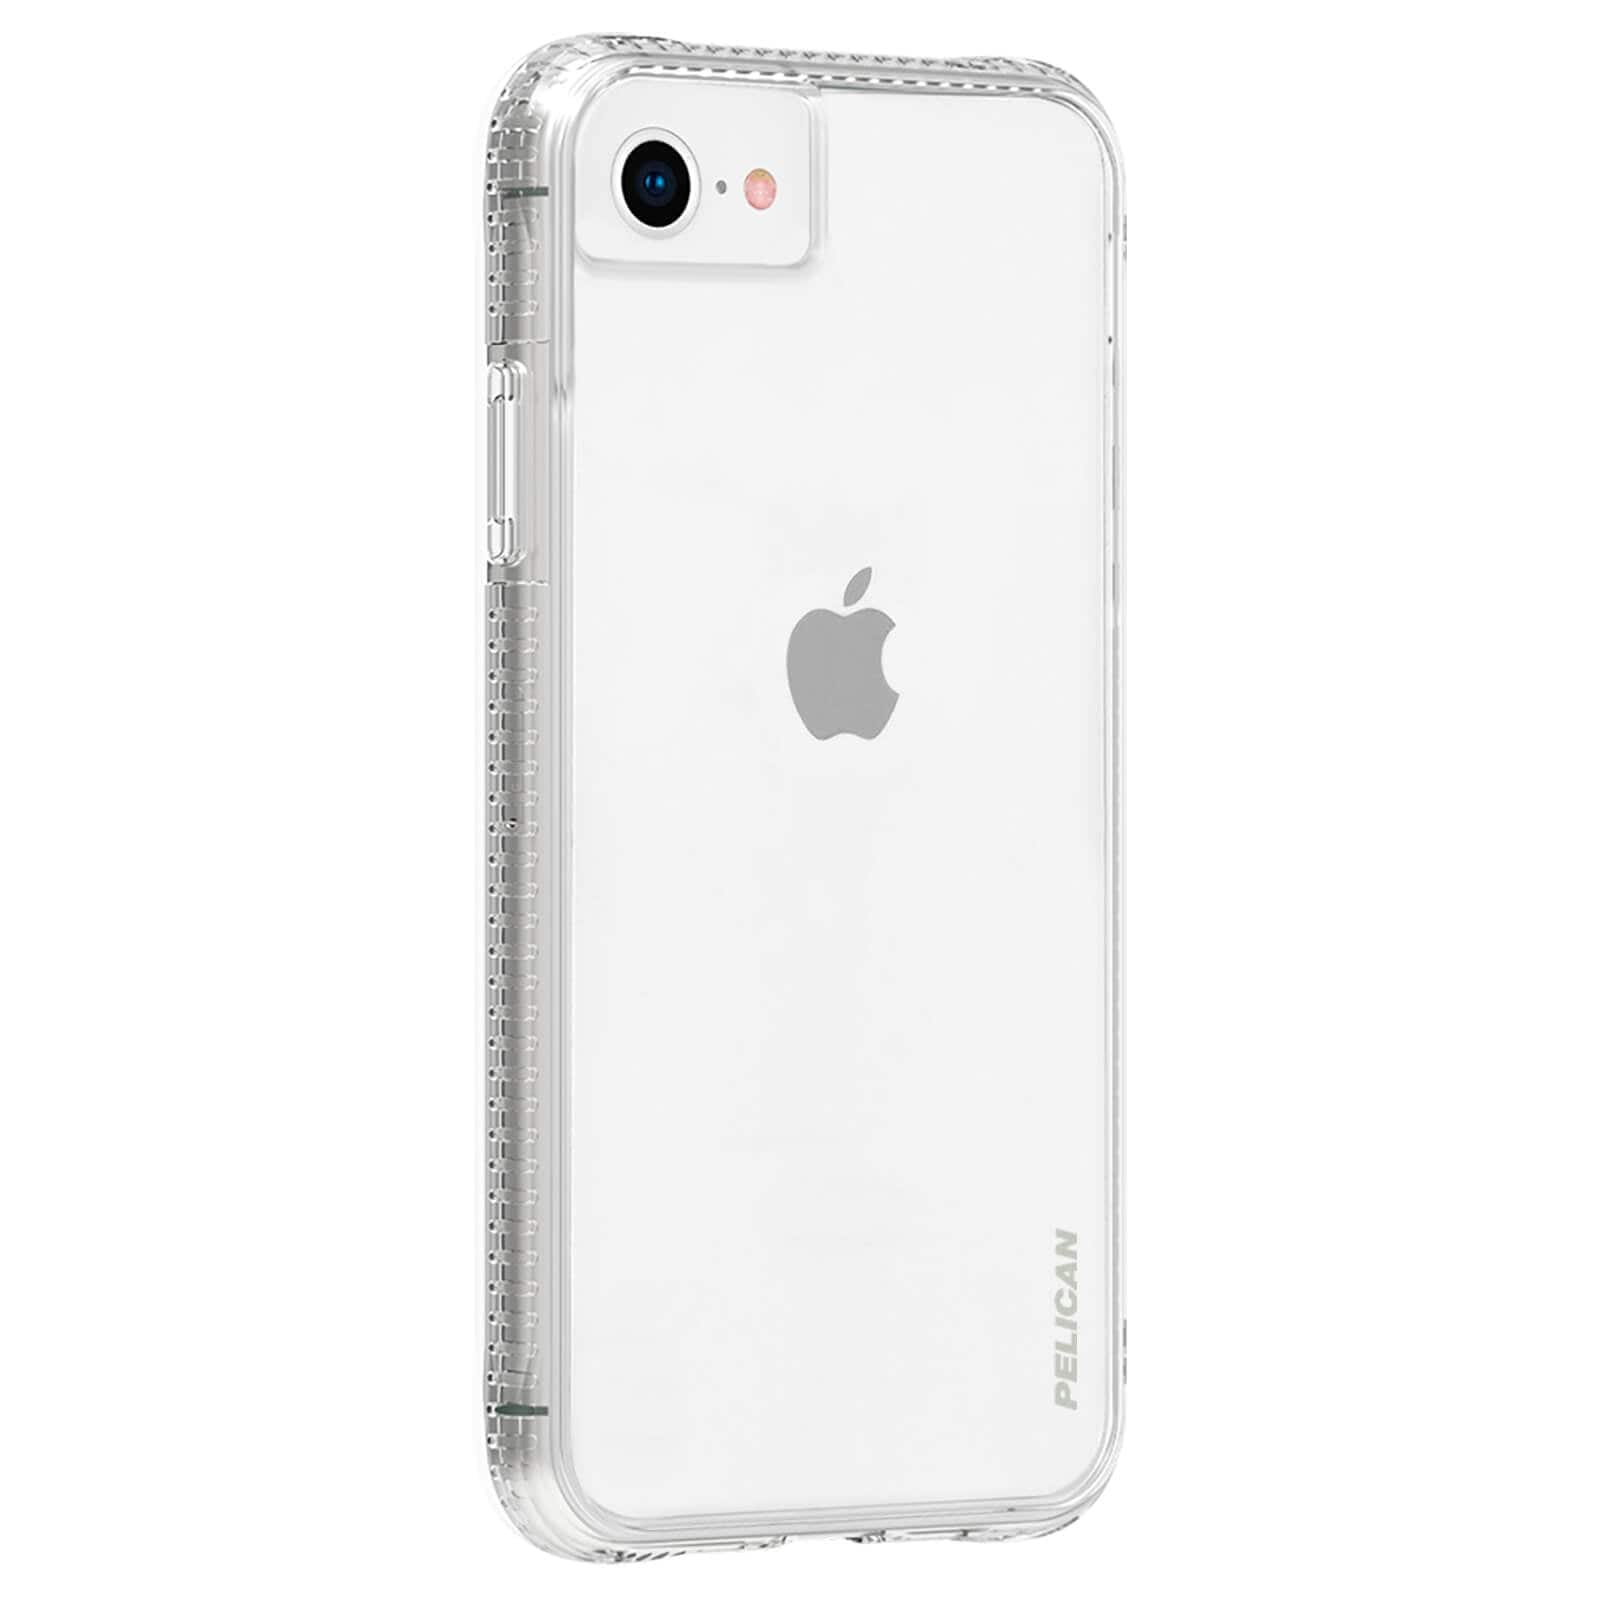 Clear, protective Pelican case for iPhone SE. color::Clear